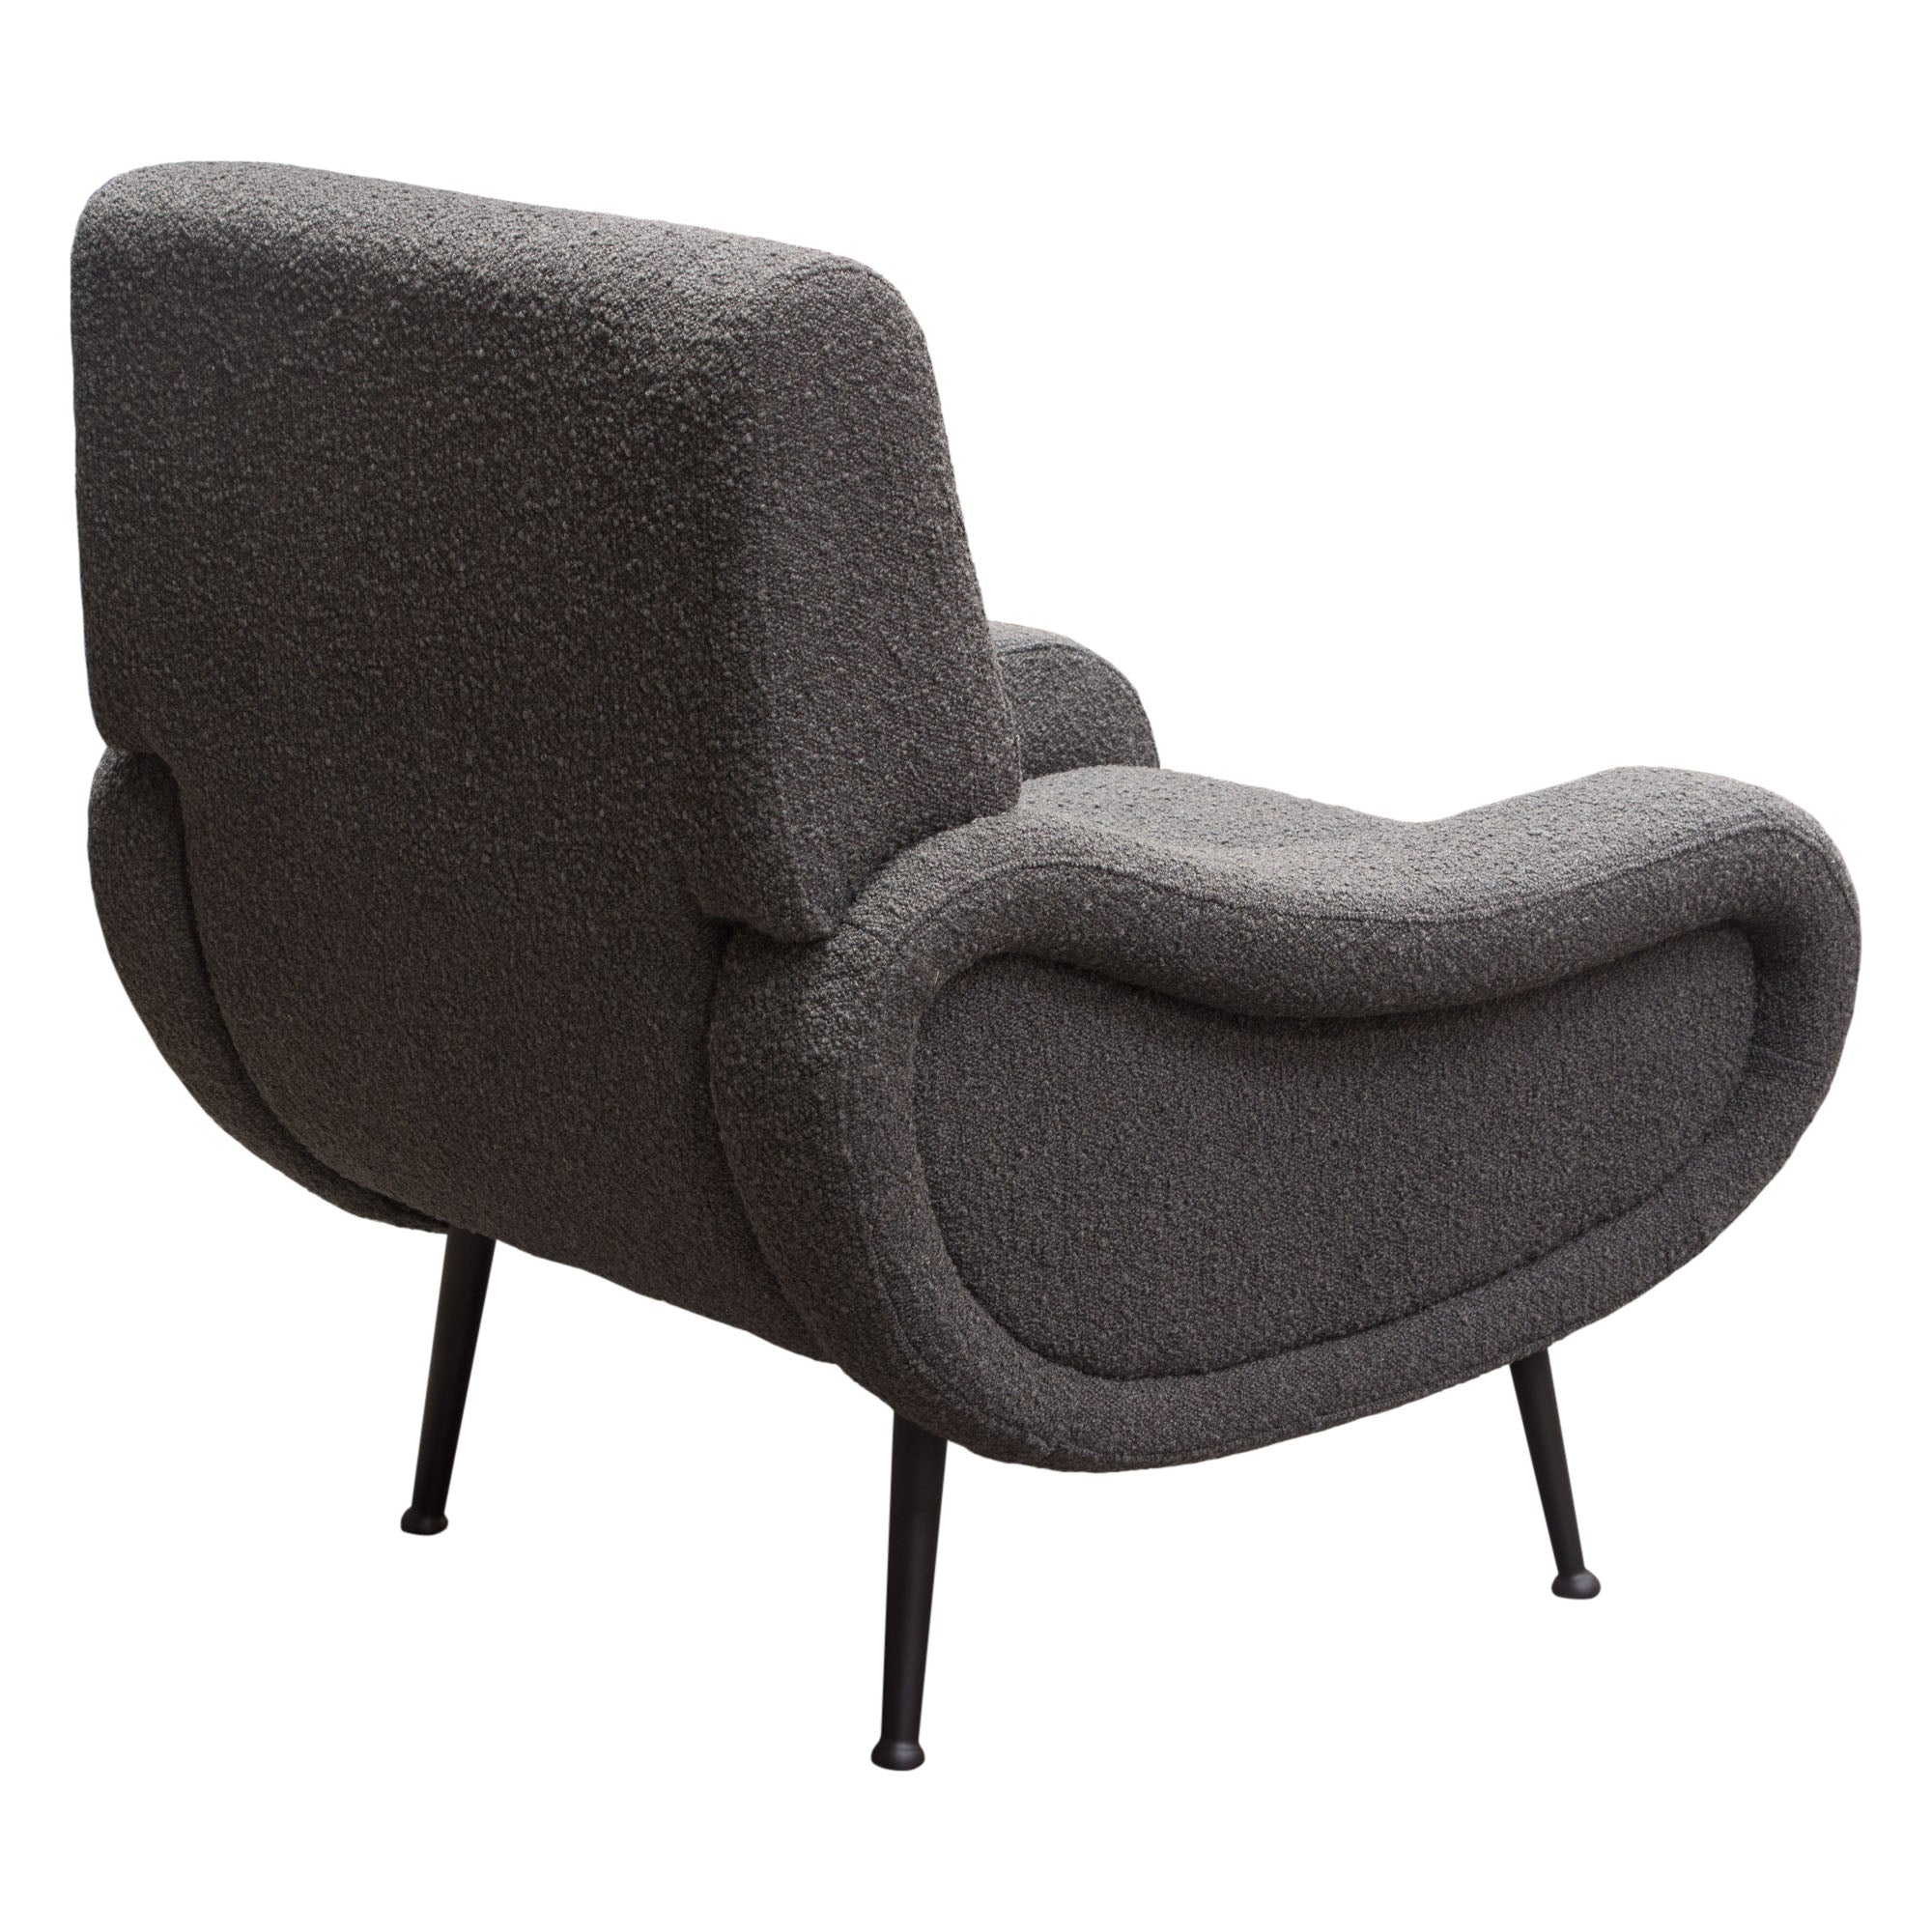 Cameron Accent Chair - Charcoal Boucle